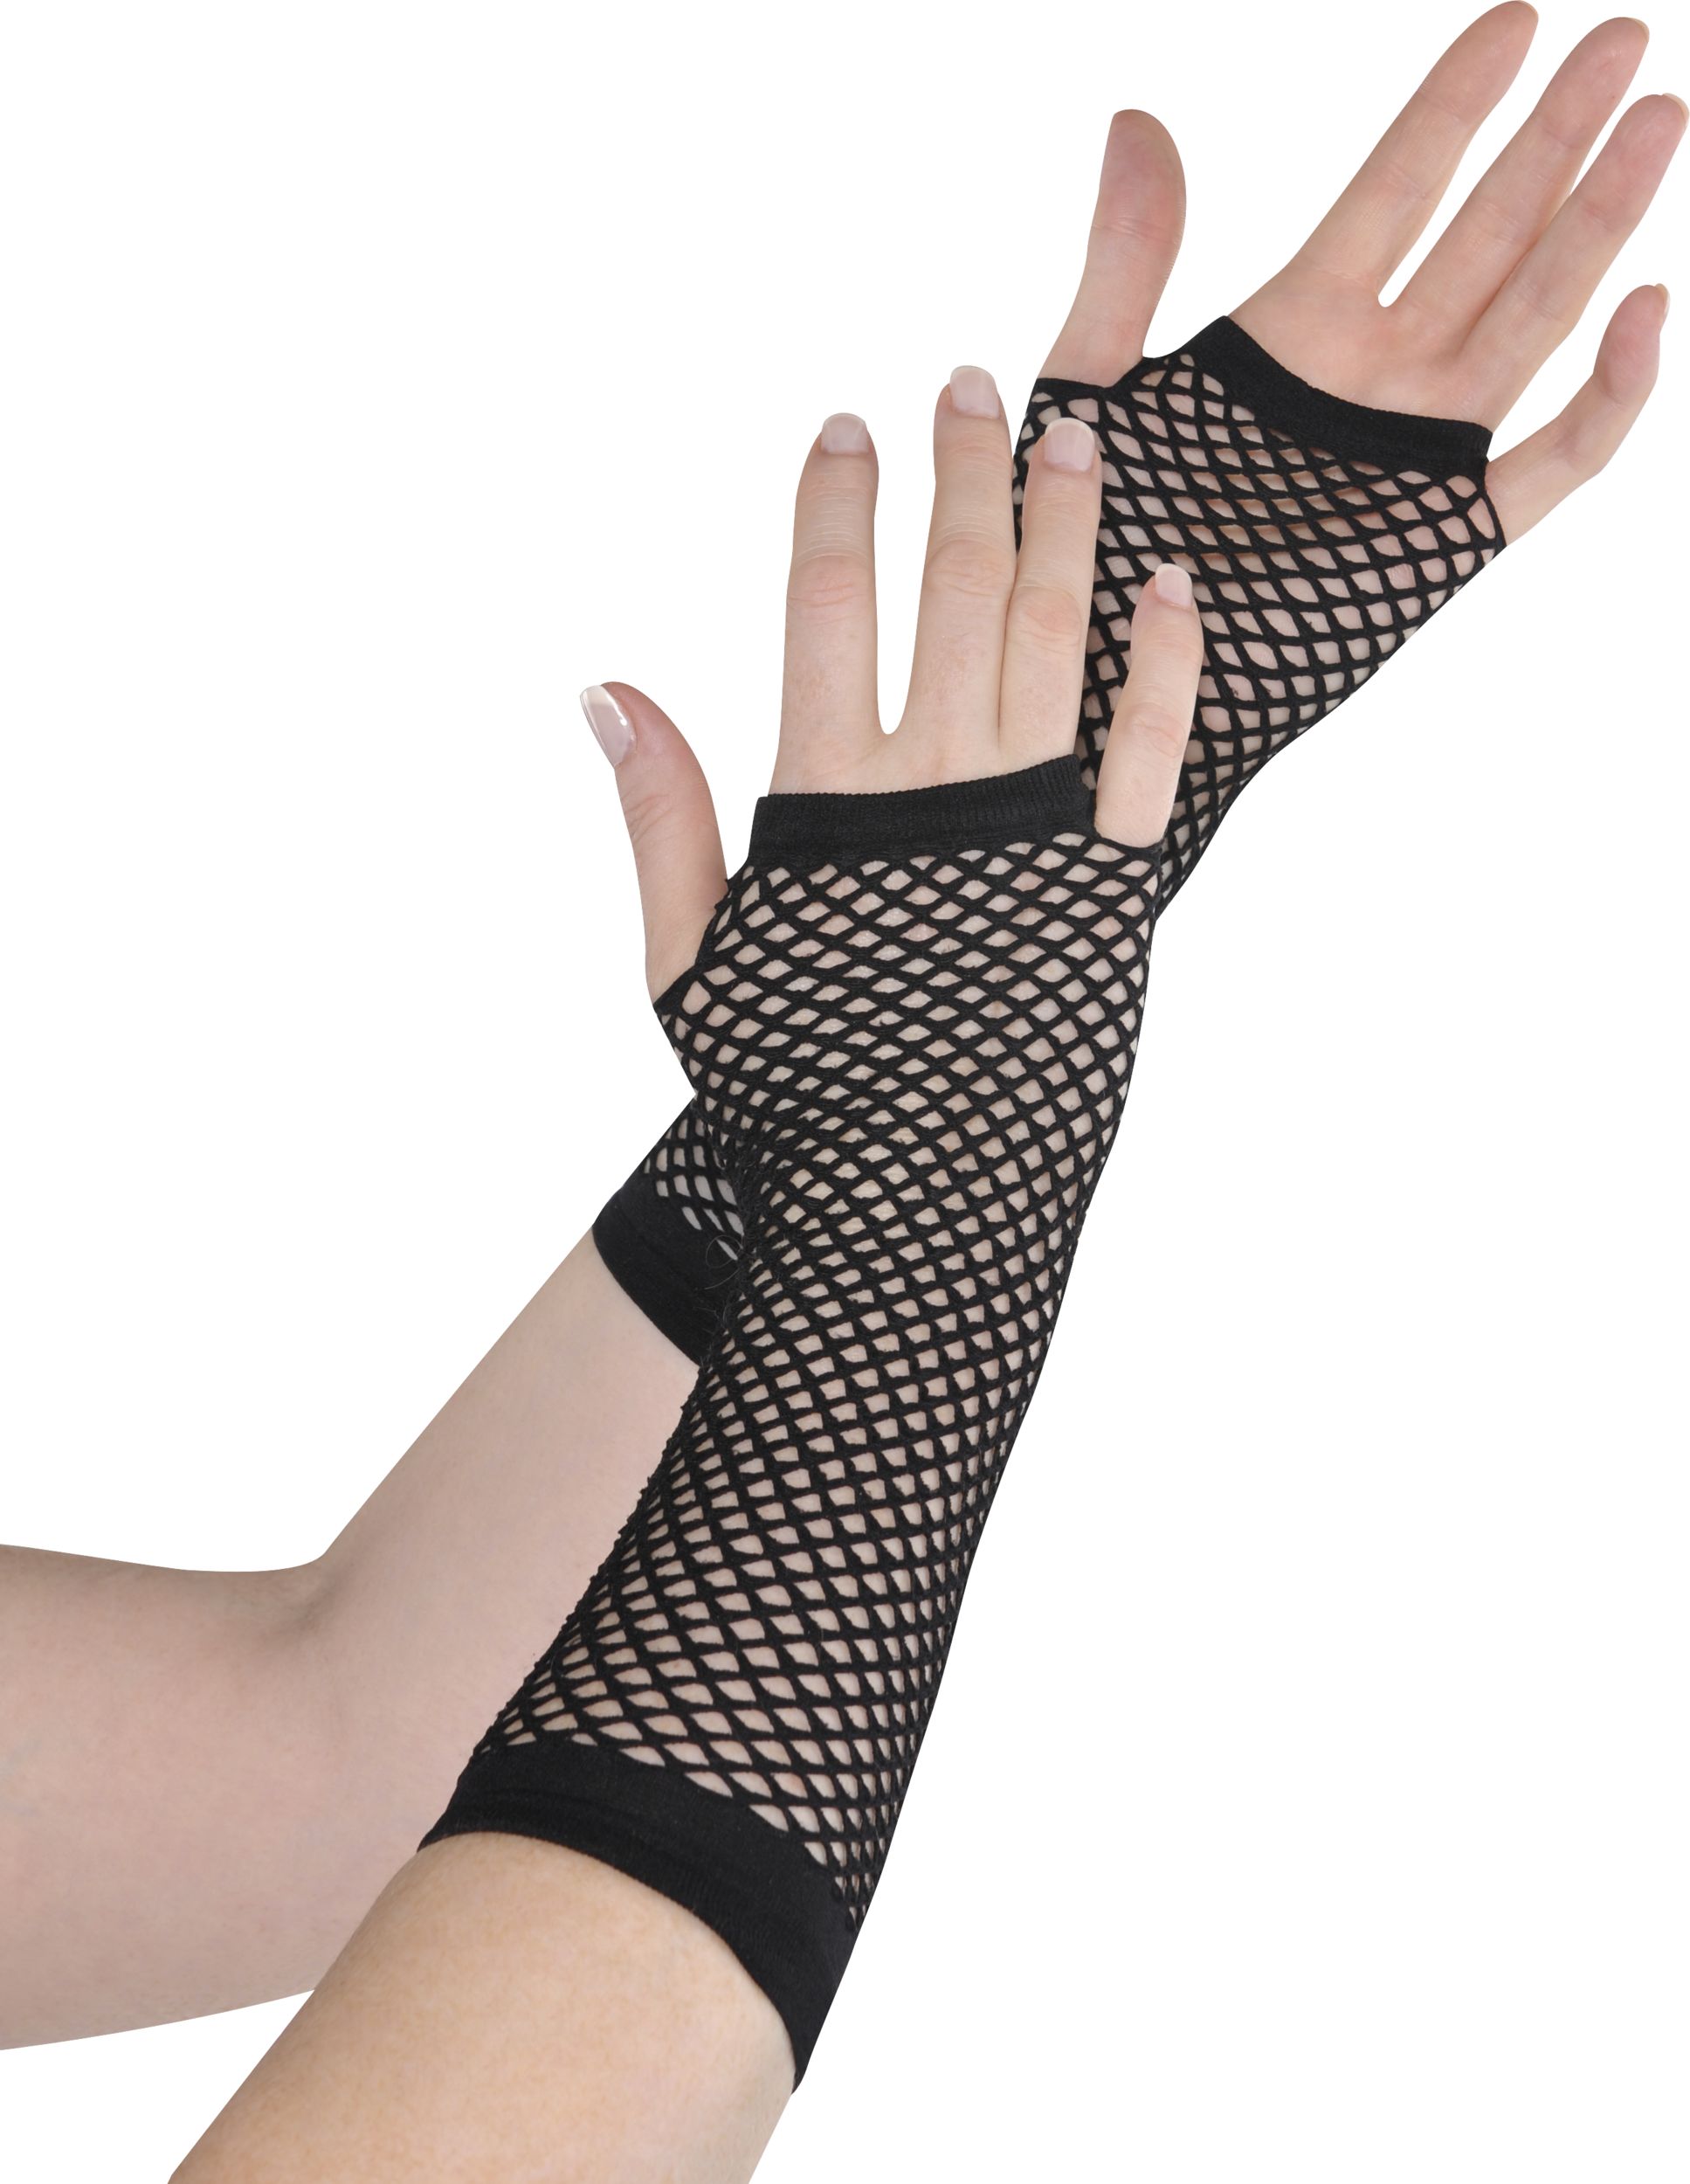 Adult Long Fingerless Fishnet Gloves, Assorted Colours, One Size, Wearable  Costume Accessory for Halloween